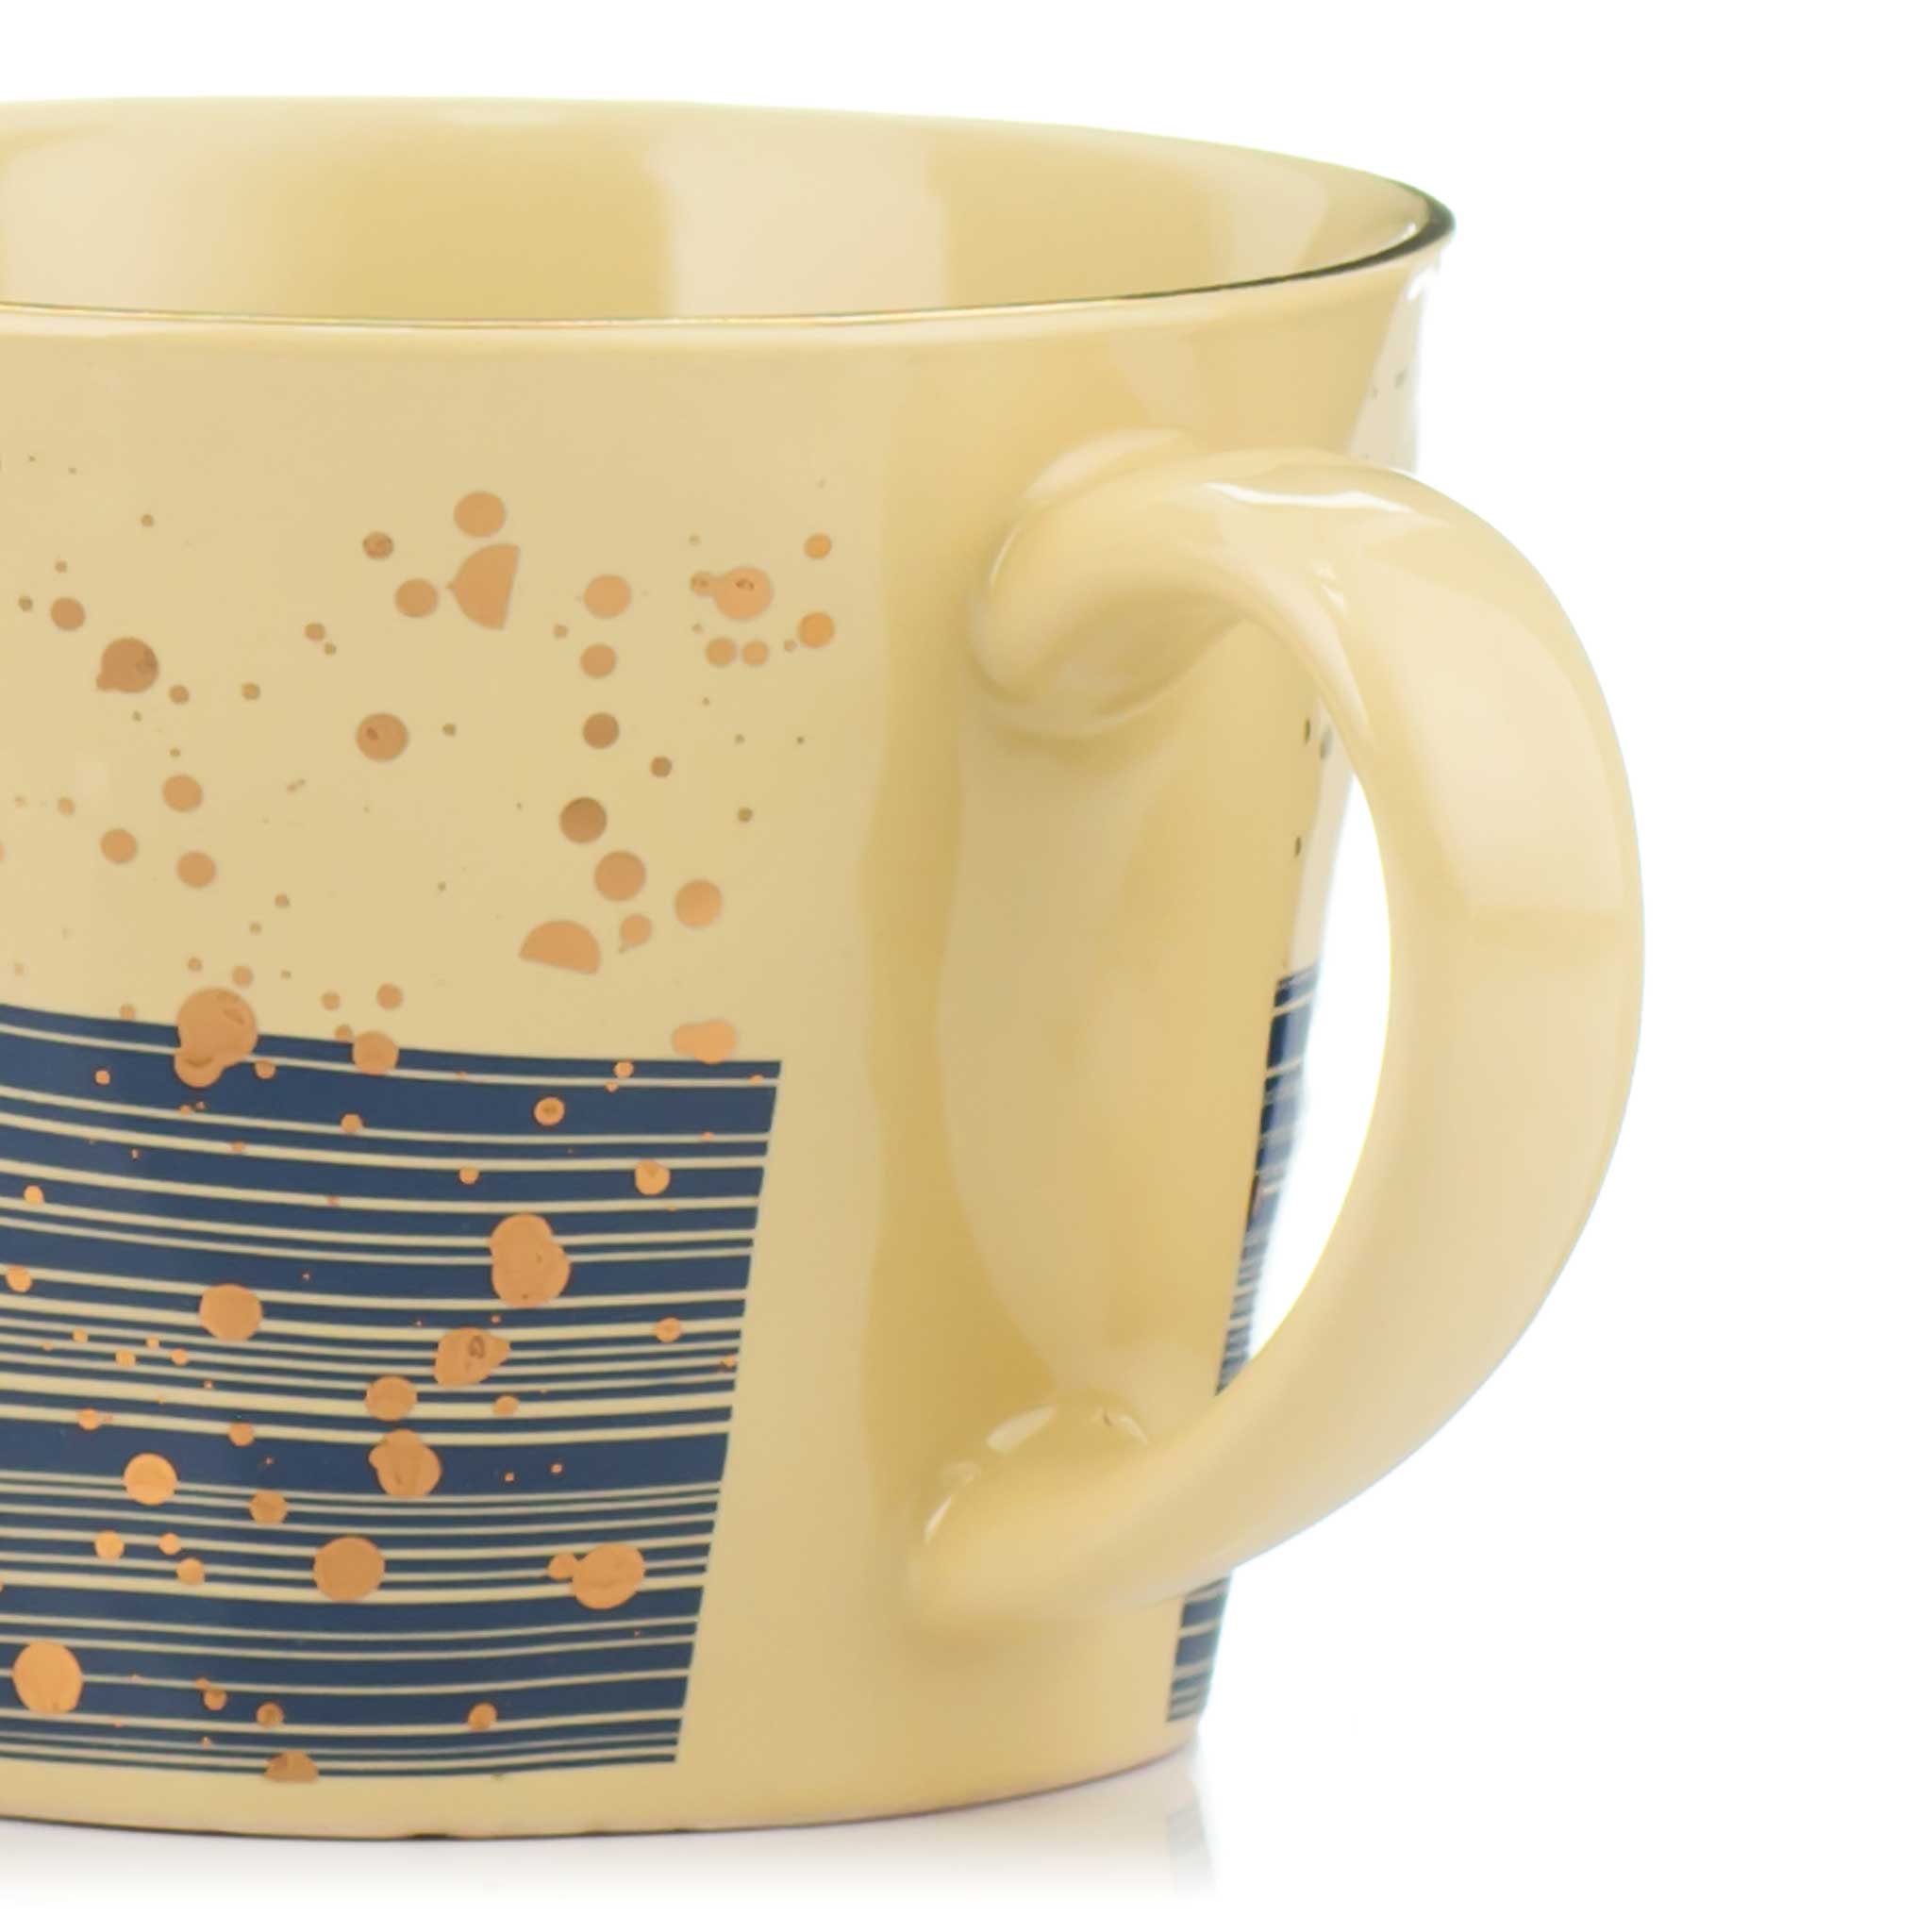 Navy and yellow mugs with golden splatters from China Blue